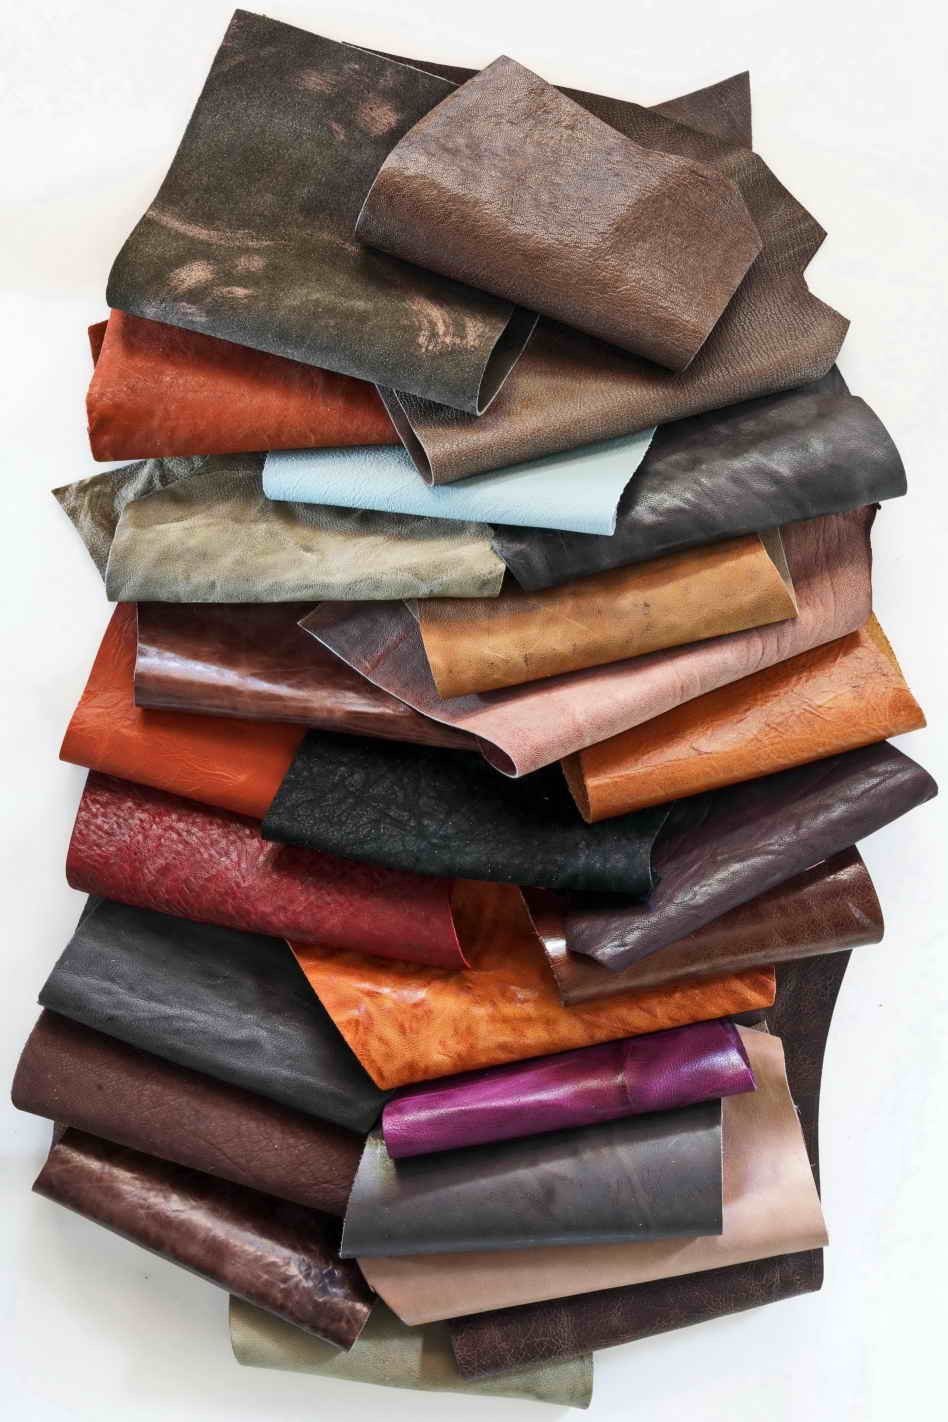 Leather scraps bag, WRINKLED WASHED, colors and softness various 0,7 lbs -  0,300 kg